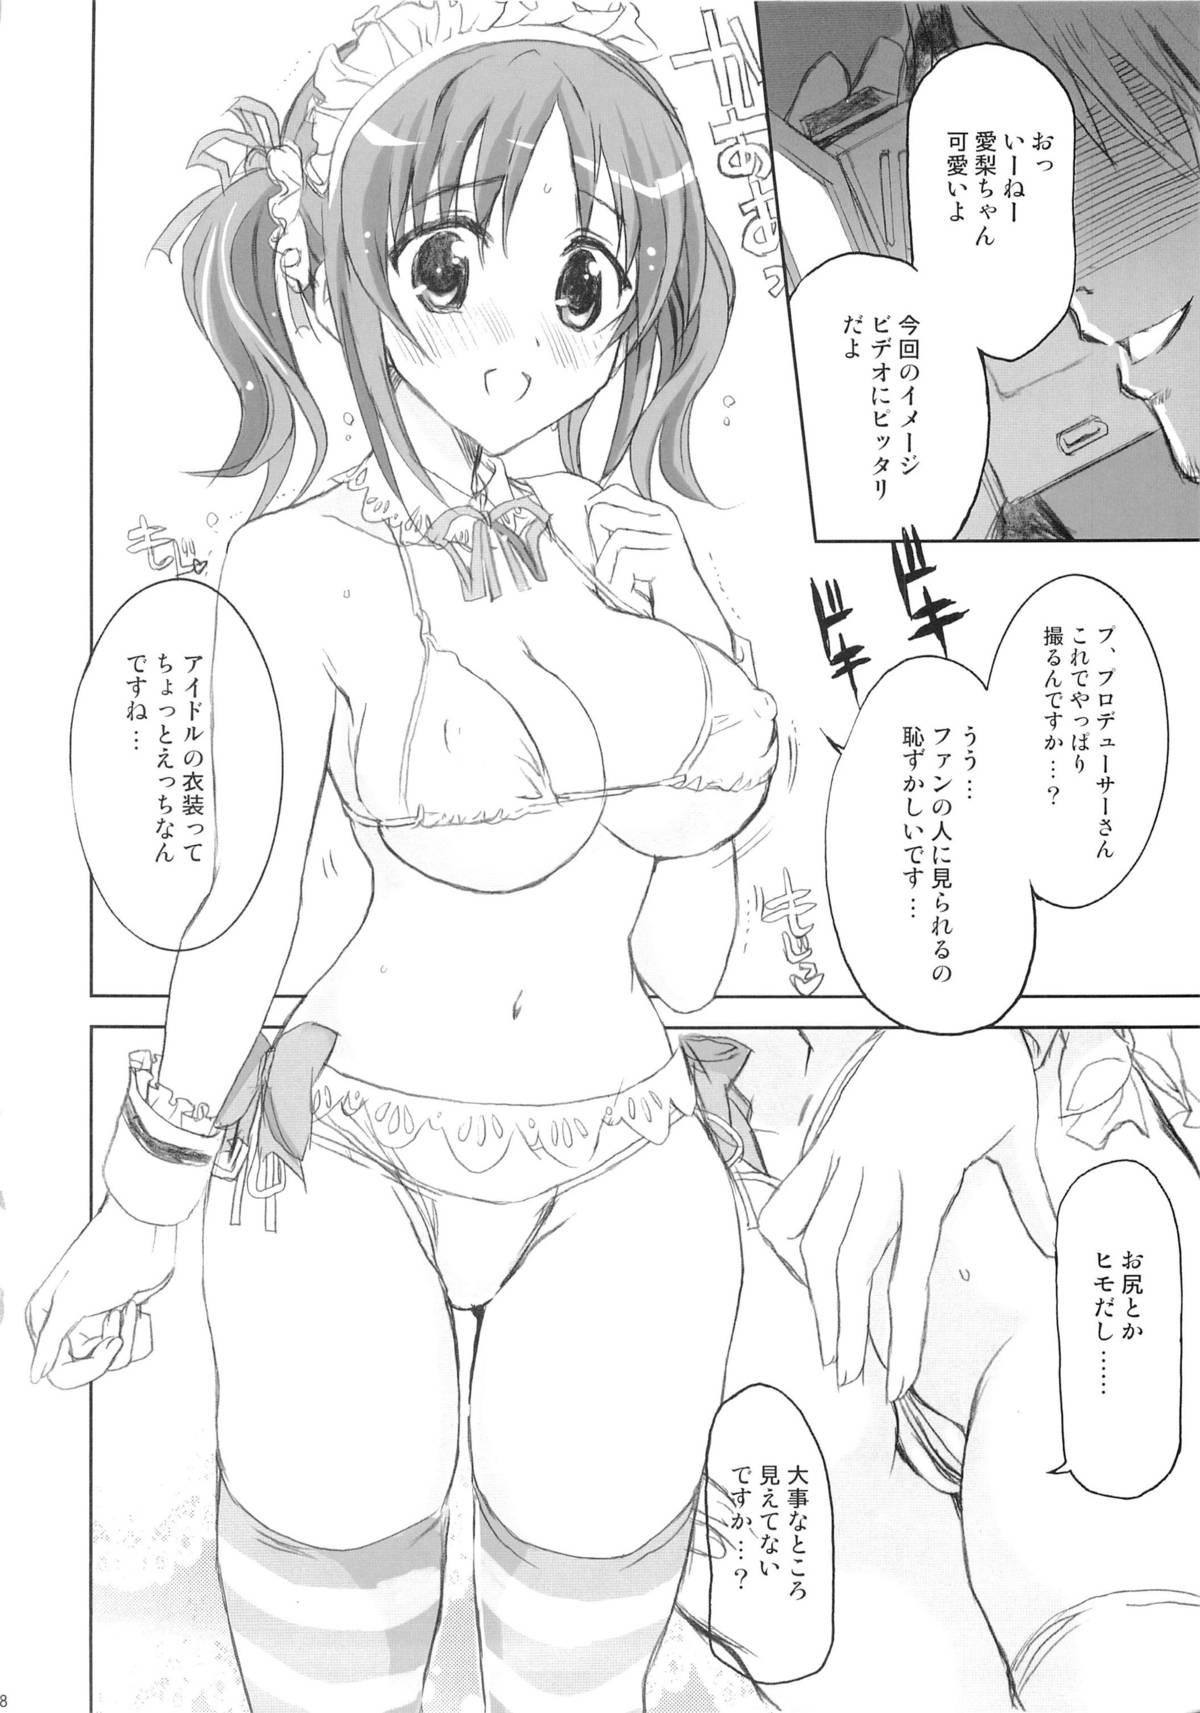 Live PASSION FRUITS GIRLS #1 "Totoki Airi" - The idolmaster Riding Cock - Page 7